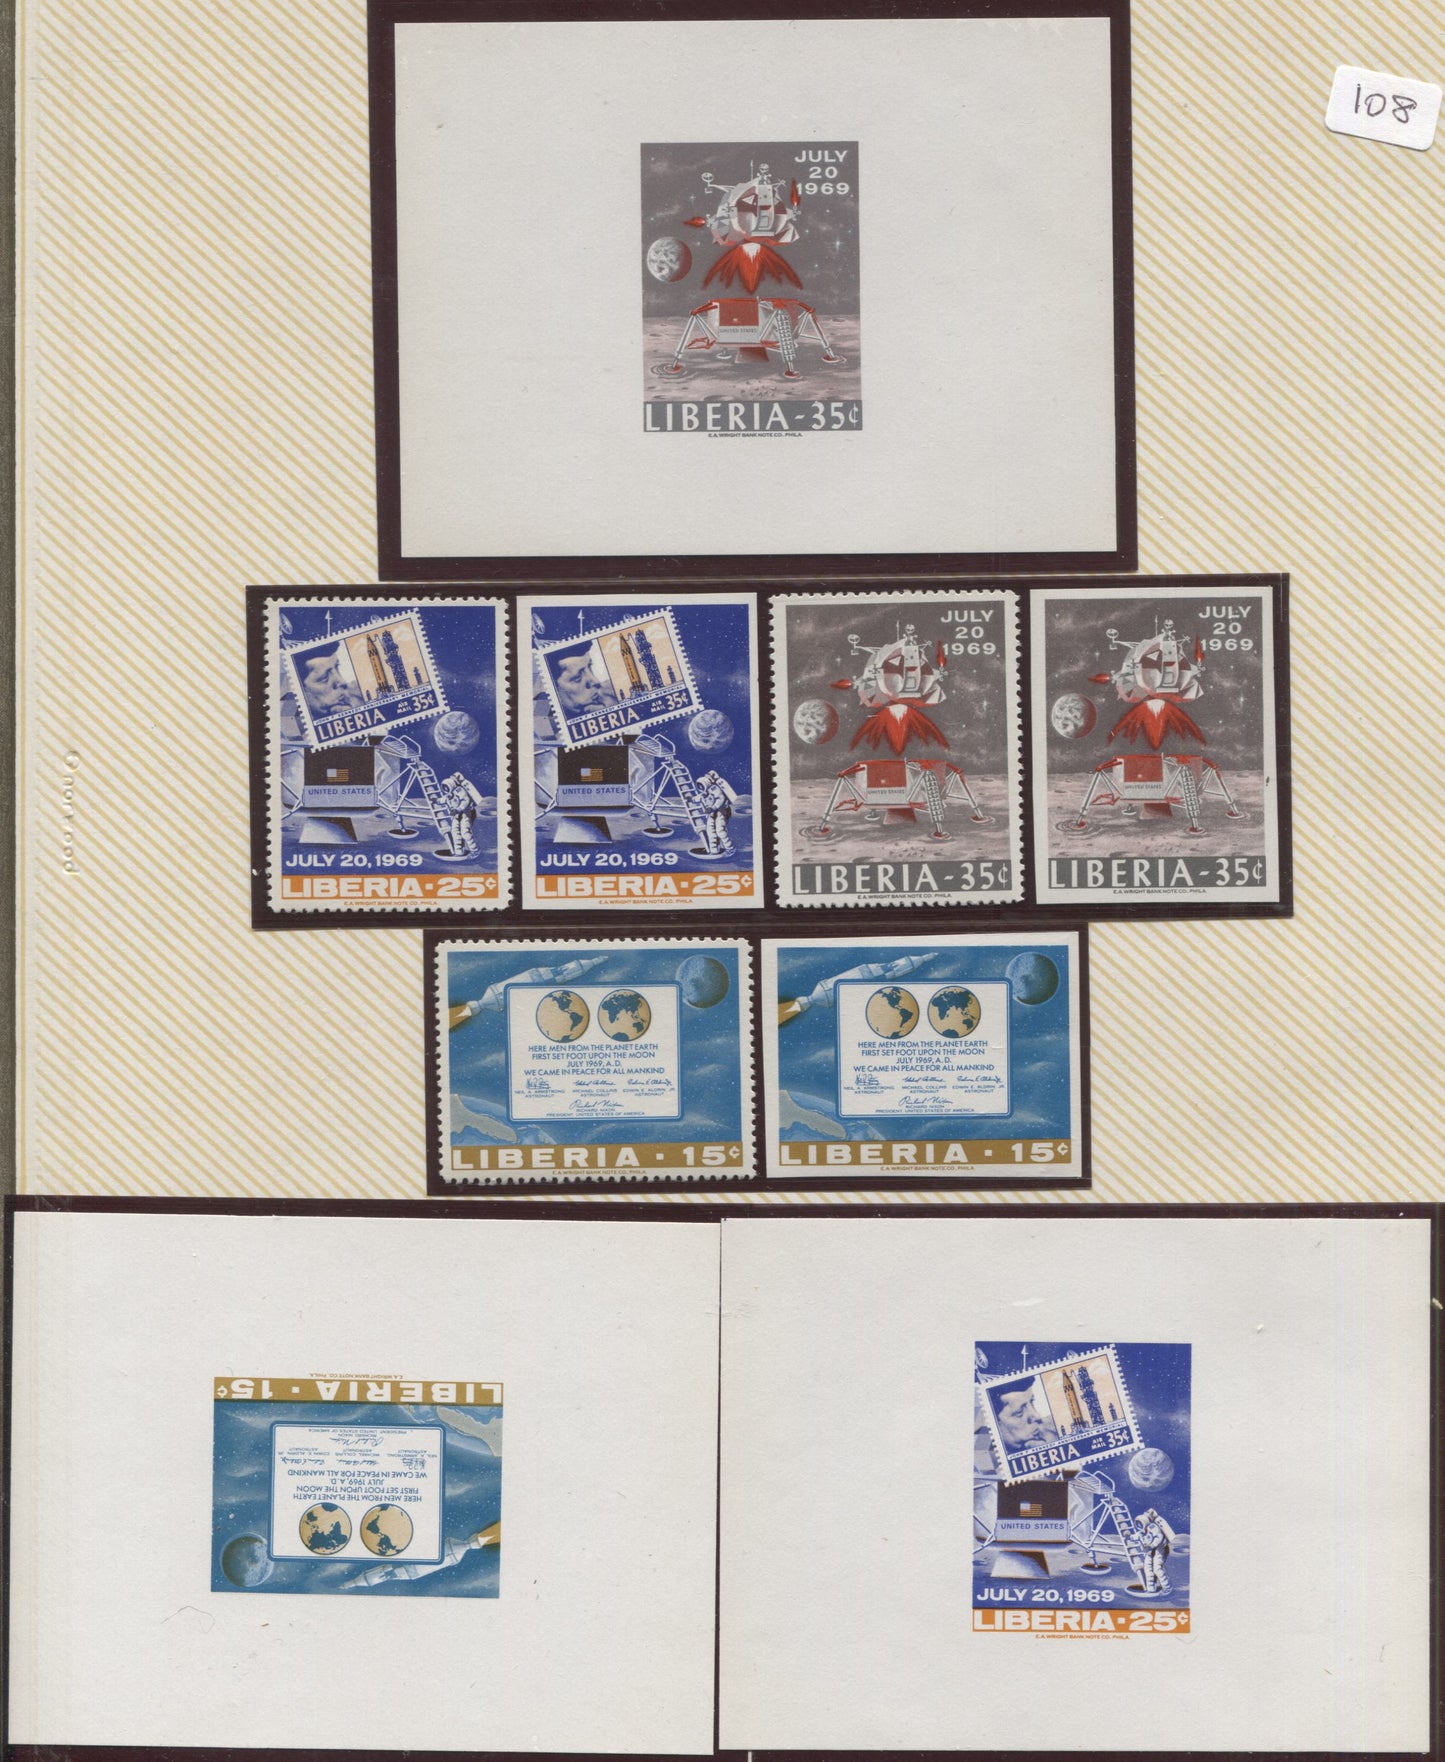 Lot 108 Liberia SC#499-501 1969 Apollo 11 Moon Landing, A VFNH Range Of Perf & Imperf Singles & Unlisted Imperforate Souvenir Sheets, 2017 Scott Cat. $22.6 USD, Click on Listing to See ALL Pictures